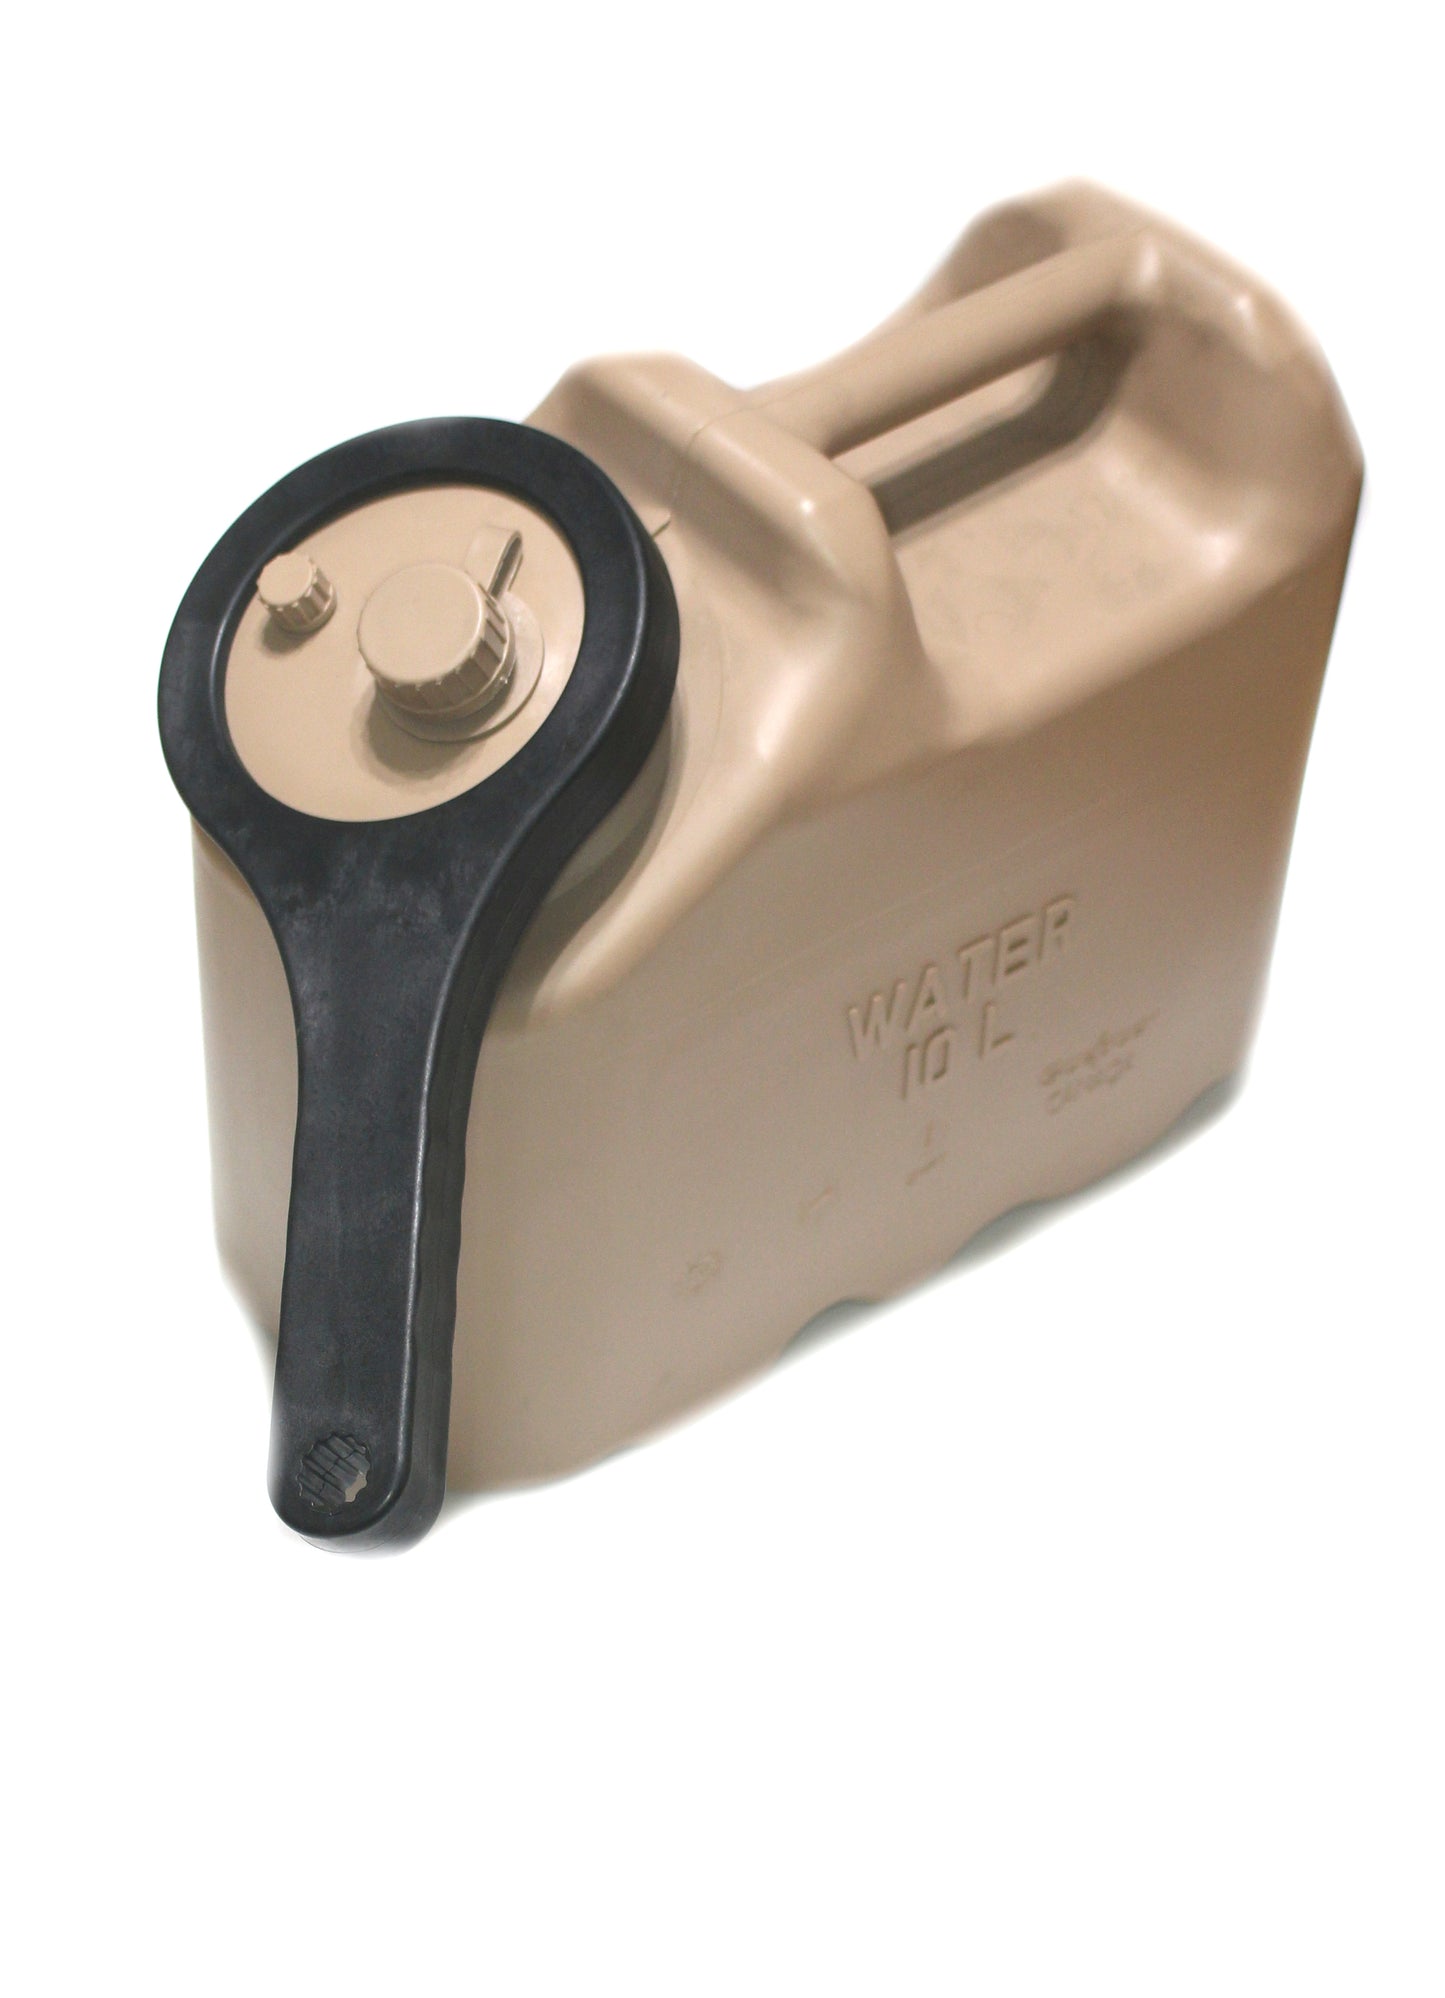 MWC Cap Wrench for your Scepter & Skilcraft MWC Military Water Cans